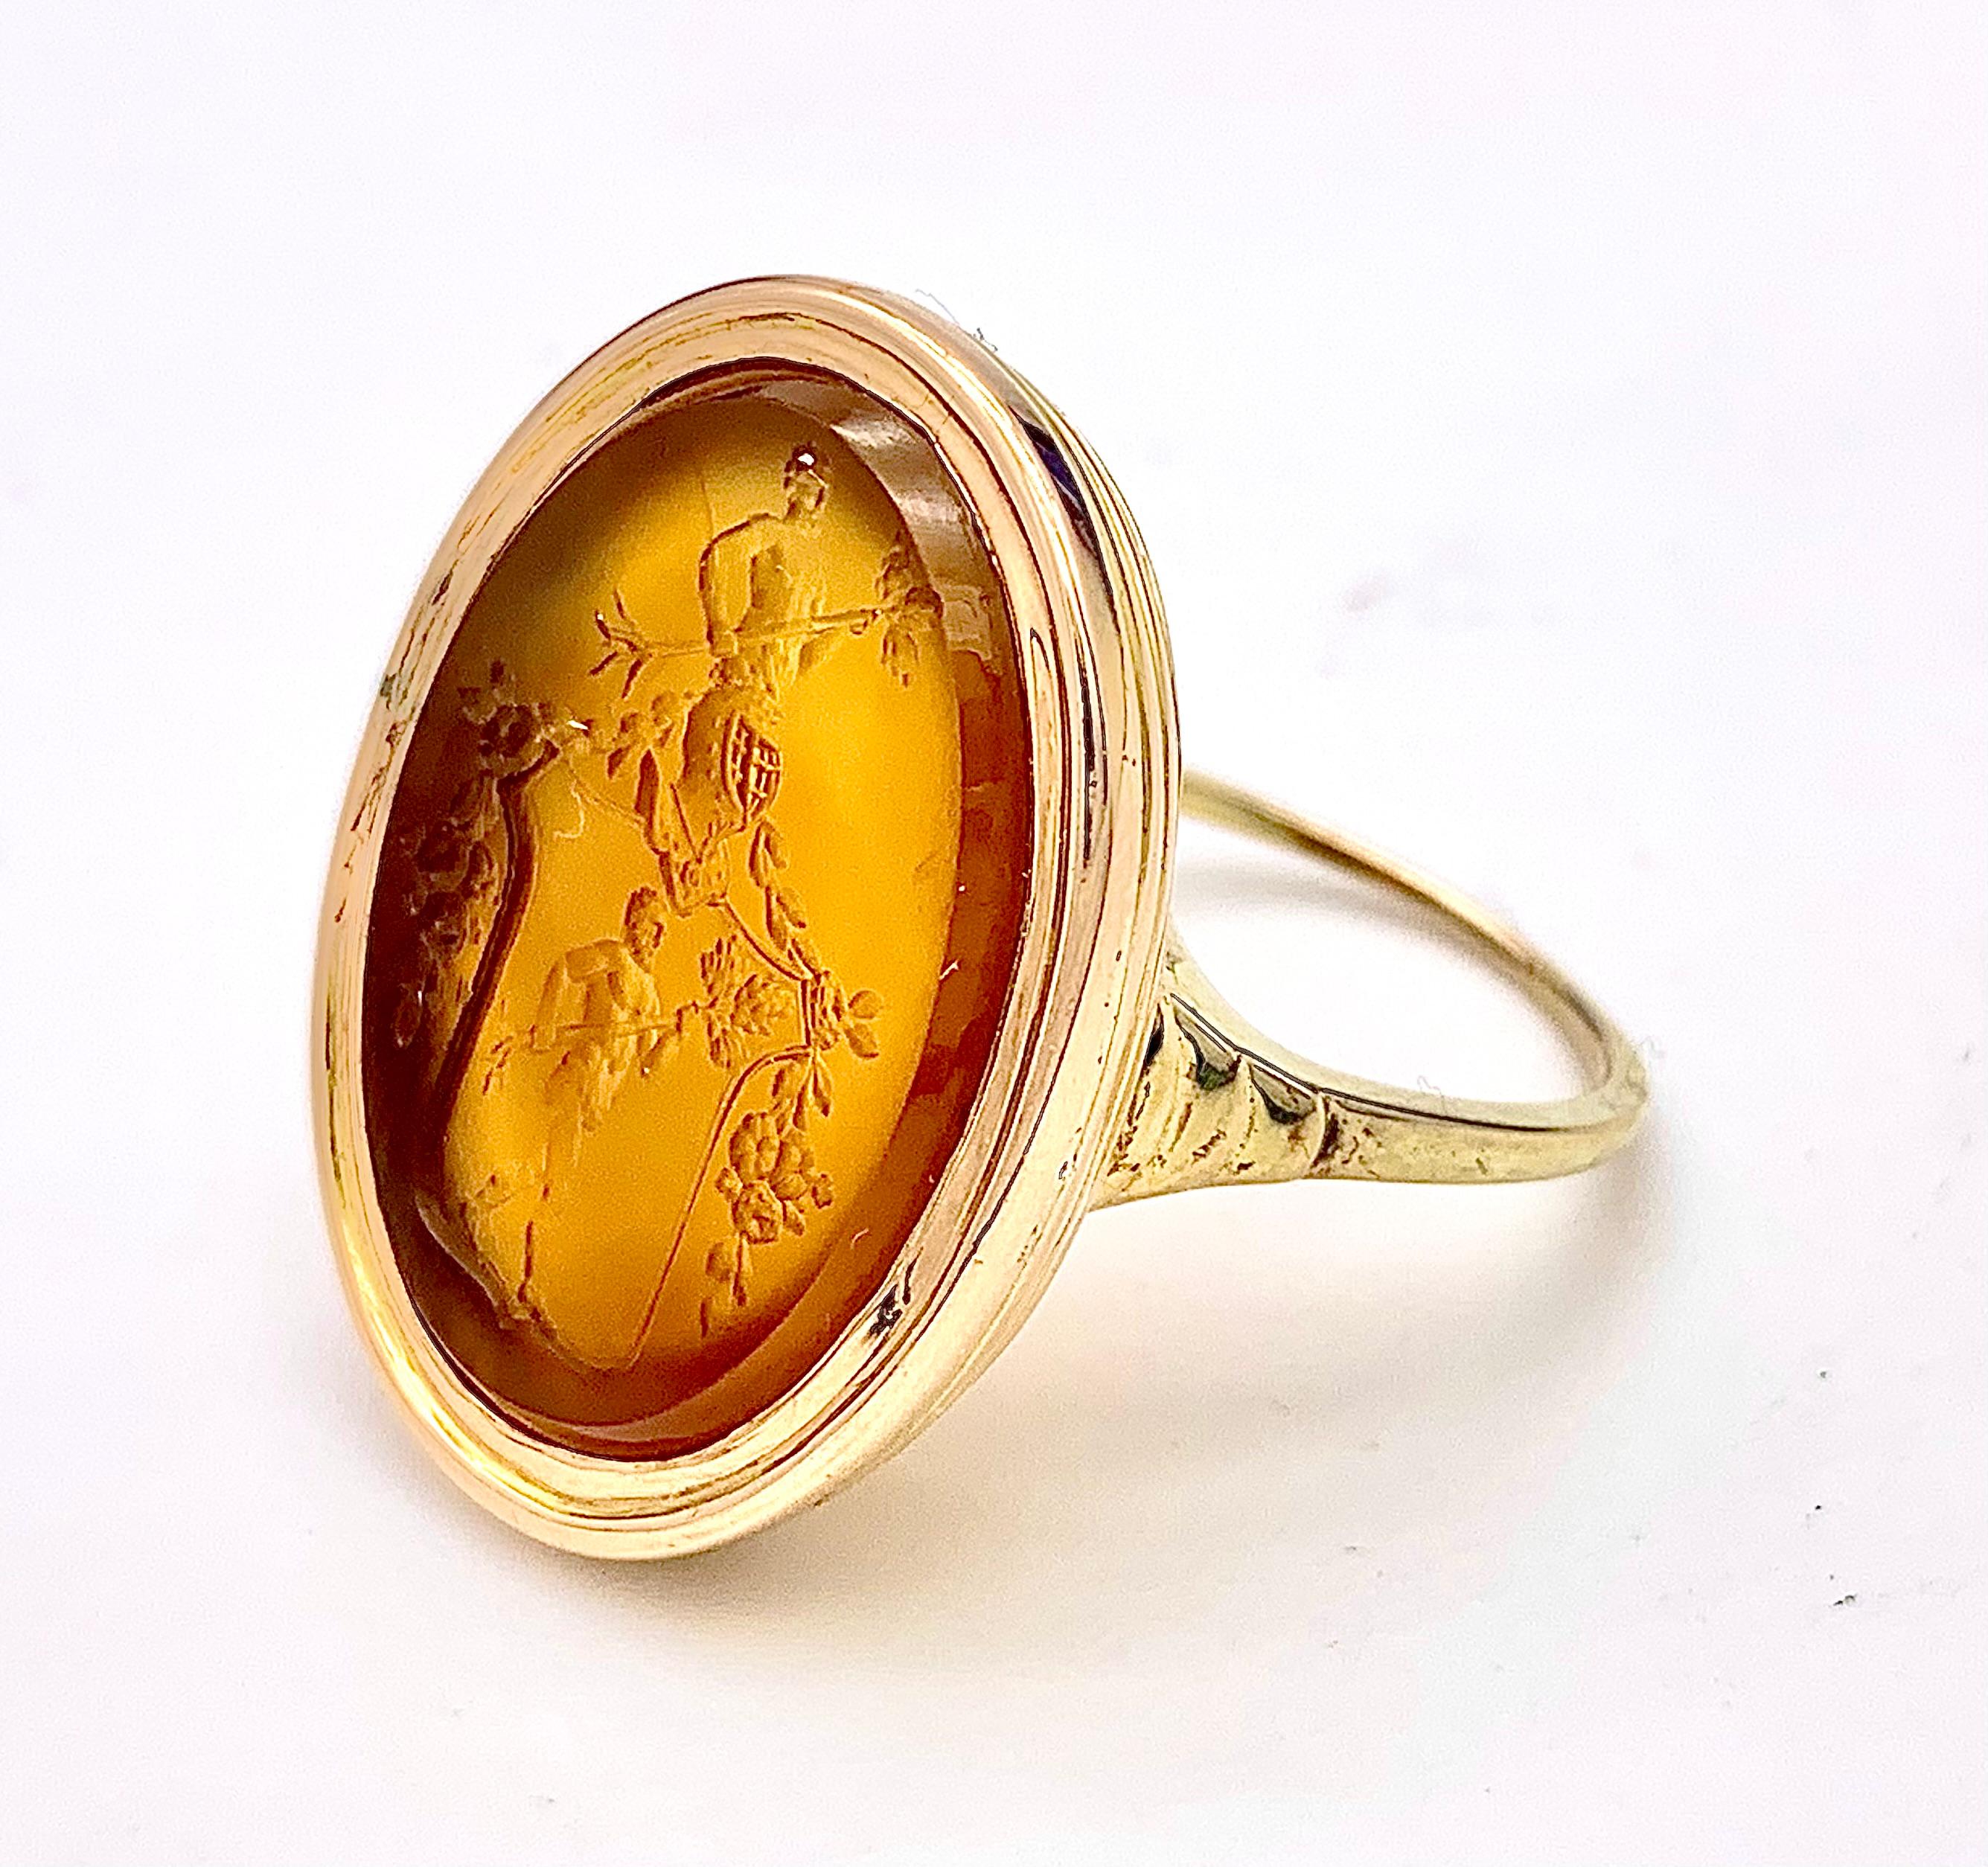 The oval carnelian intaglio shows a heraldic crest. Depicted is the outline of a shield with a helmet. Inside the shield a striding man with a beard dressed only with a loin cloth is holding a young tree with its roots in both hands. Out of the